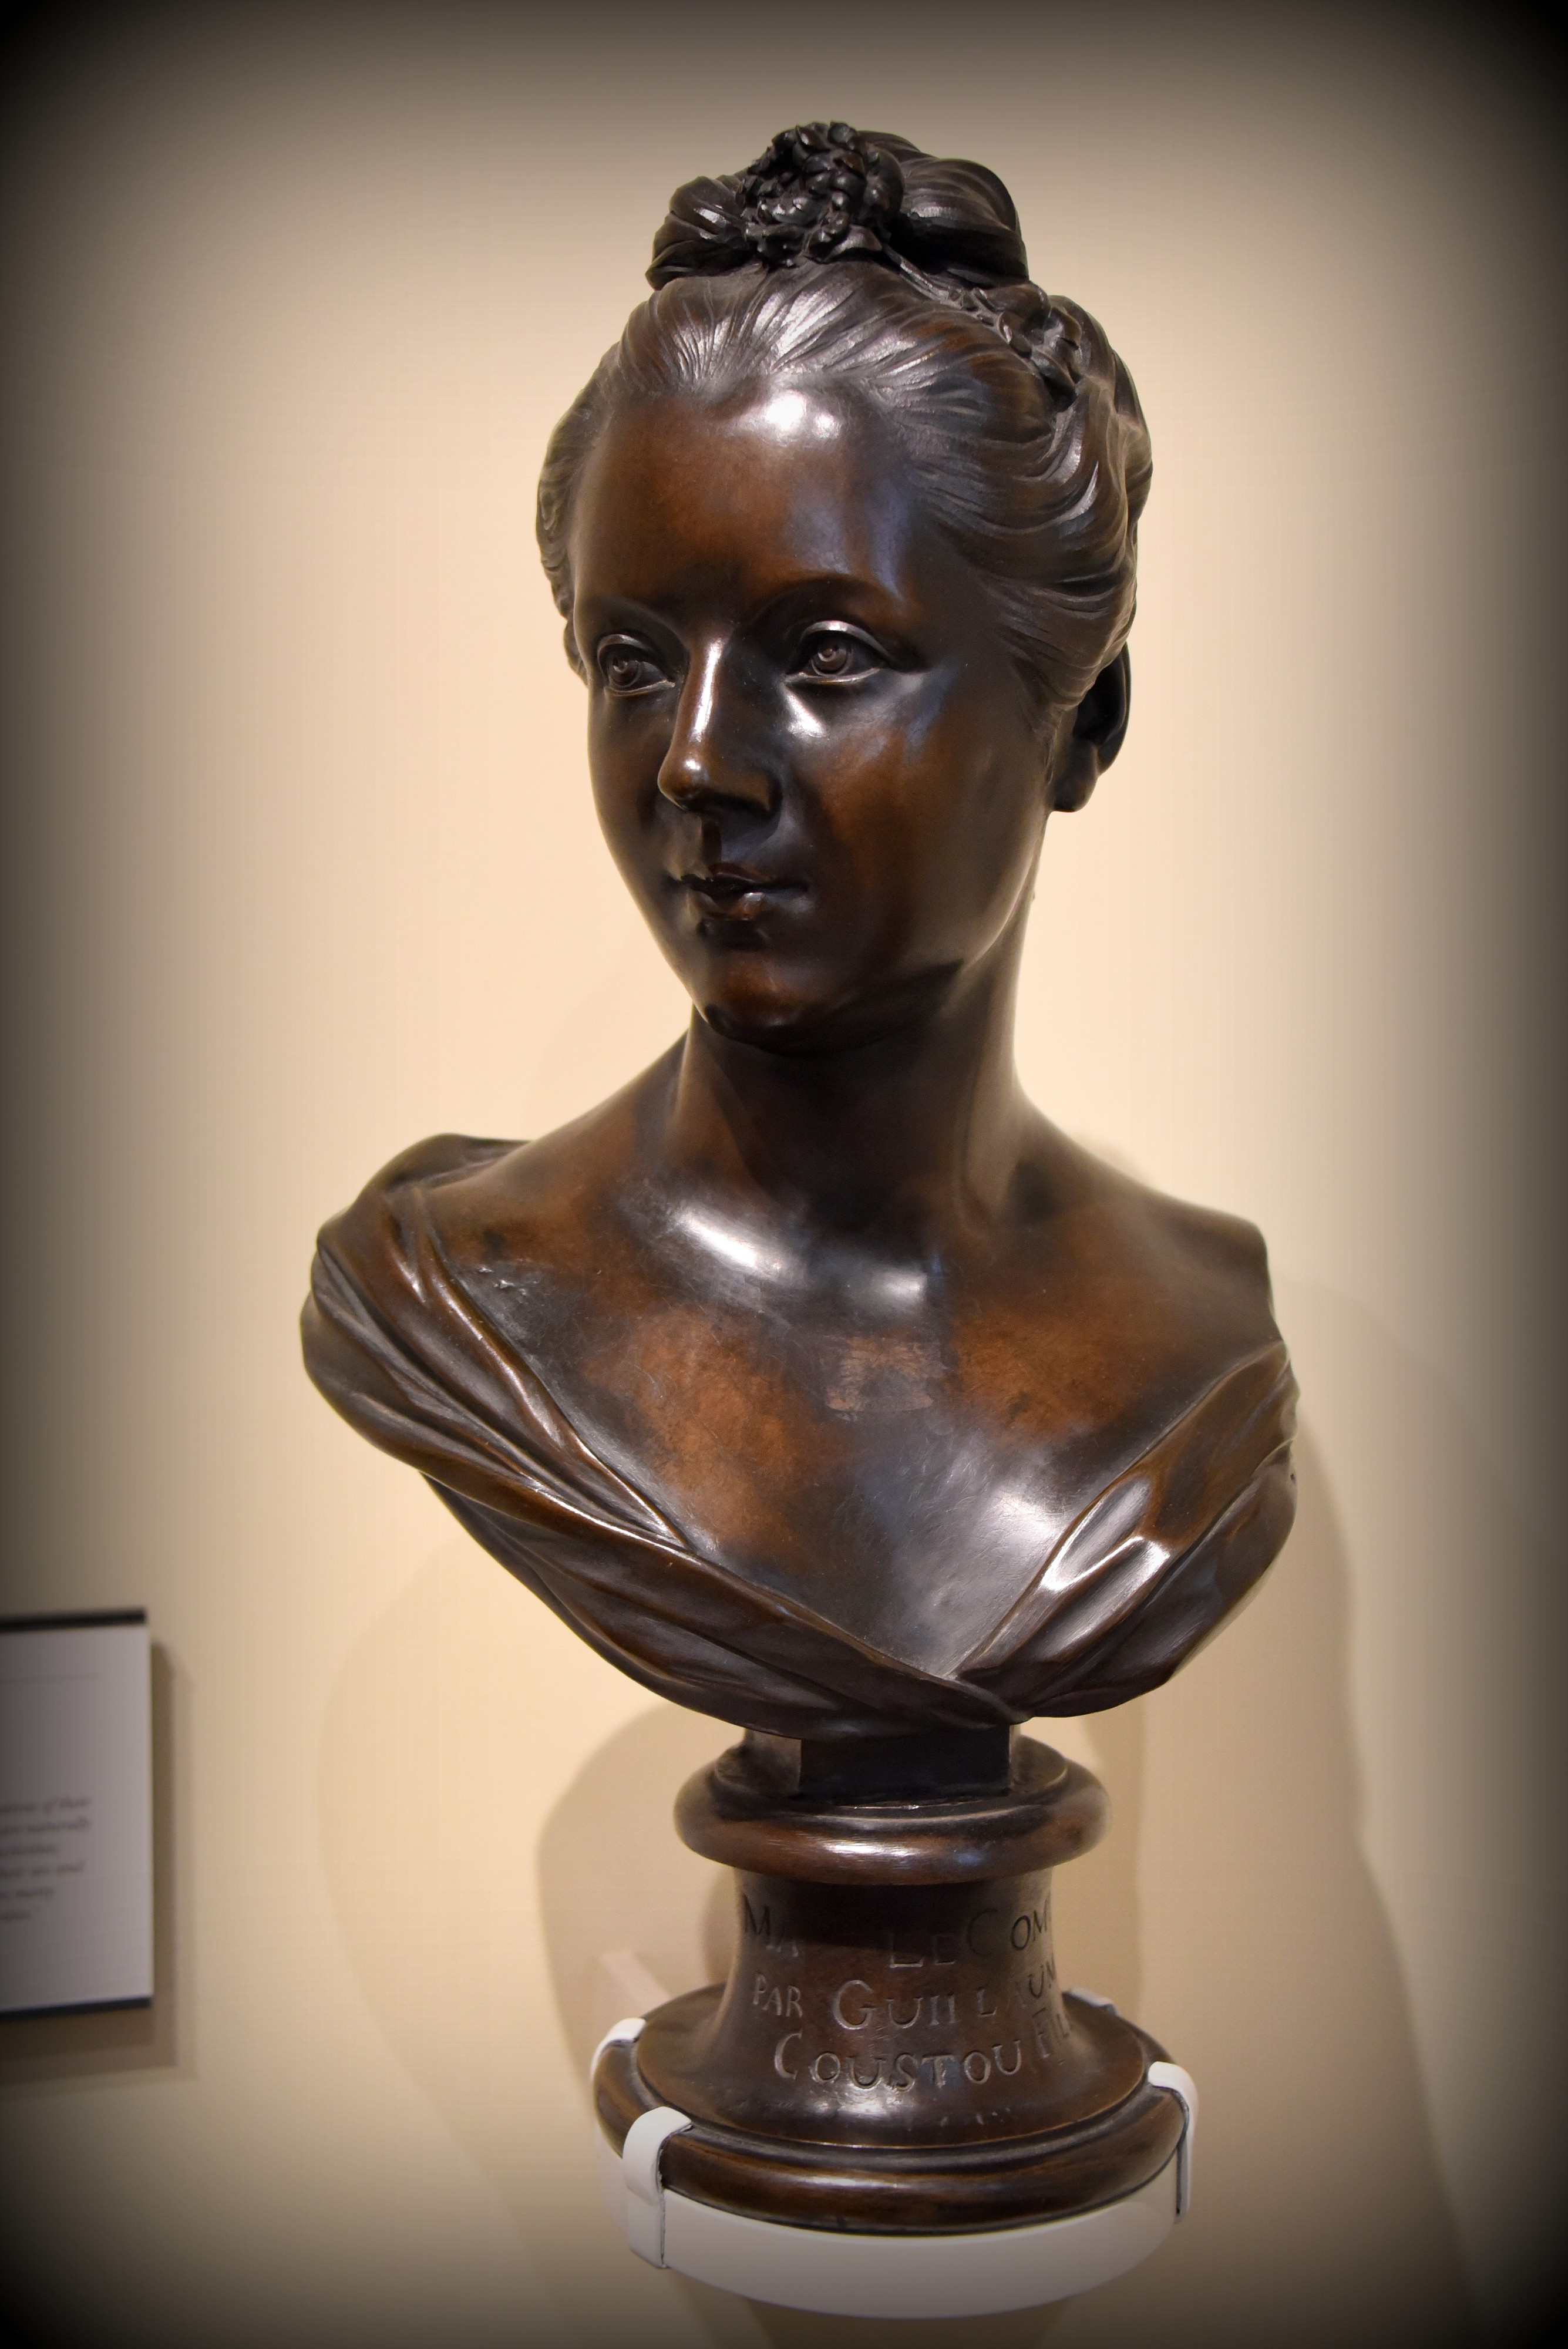 Bronze bust of Marguerite Le Comte, 1750 CE. By Guillaume Coustou II. From Paris, France. The Victoria and Albert Museum, London